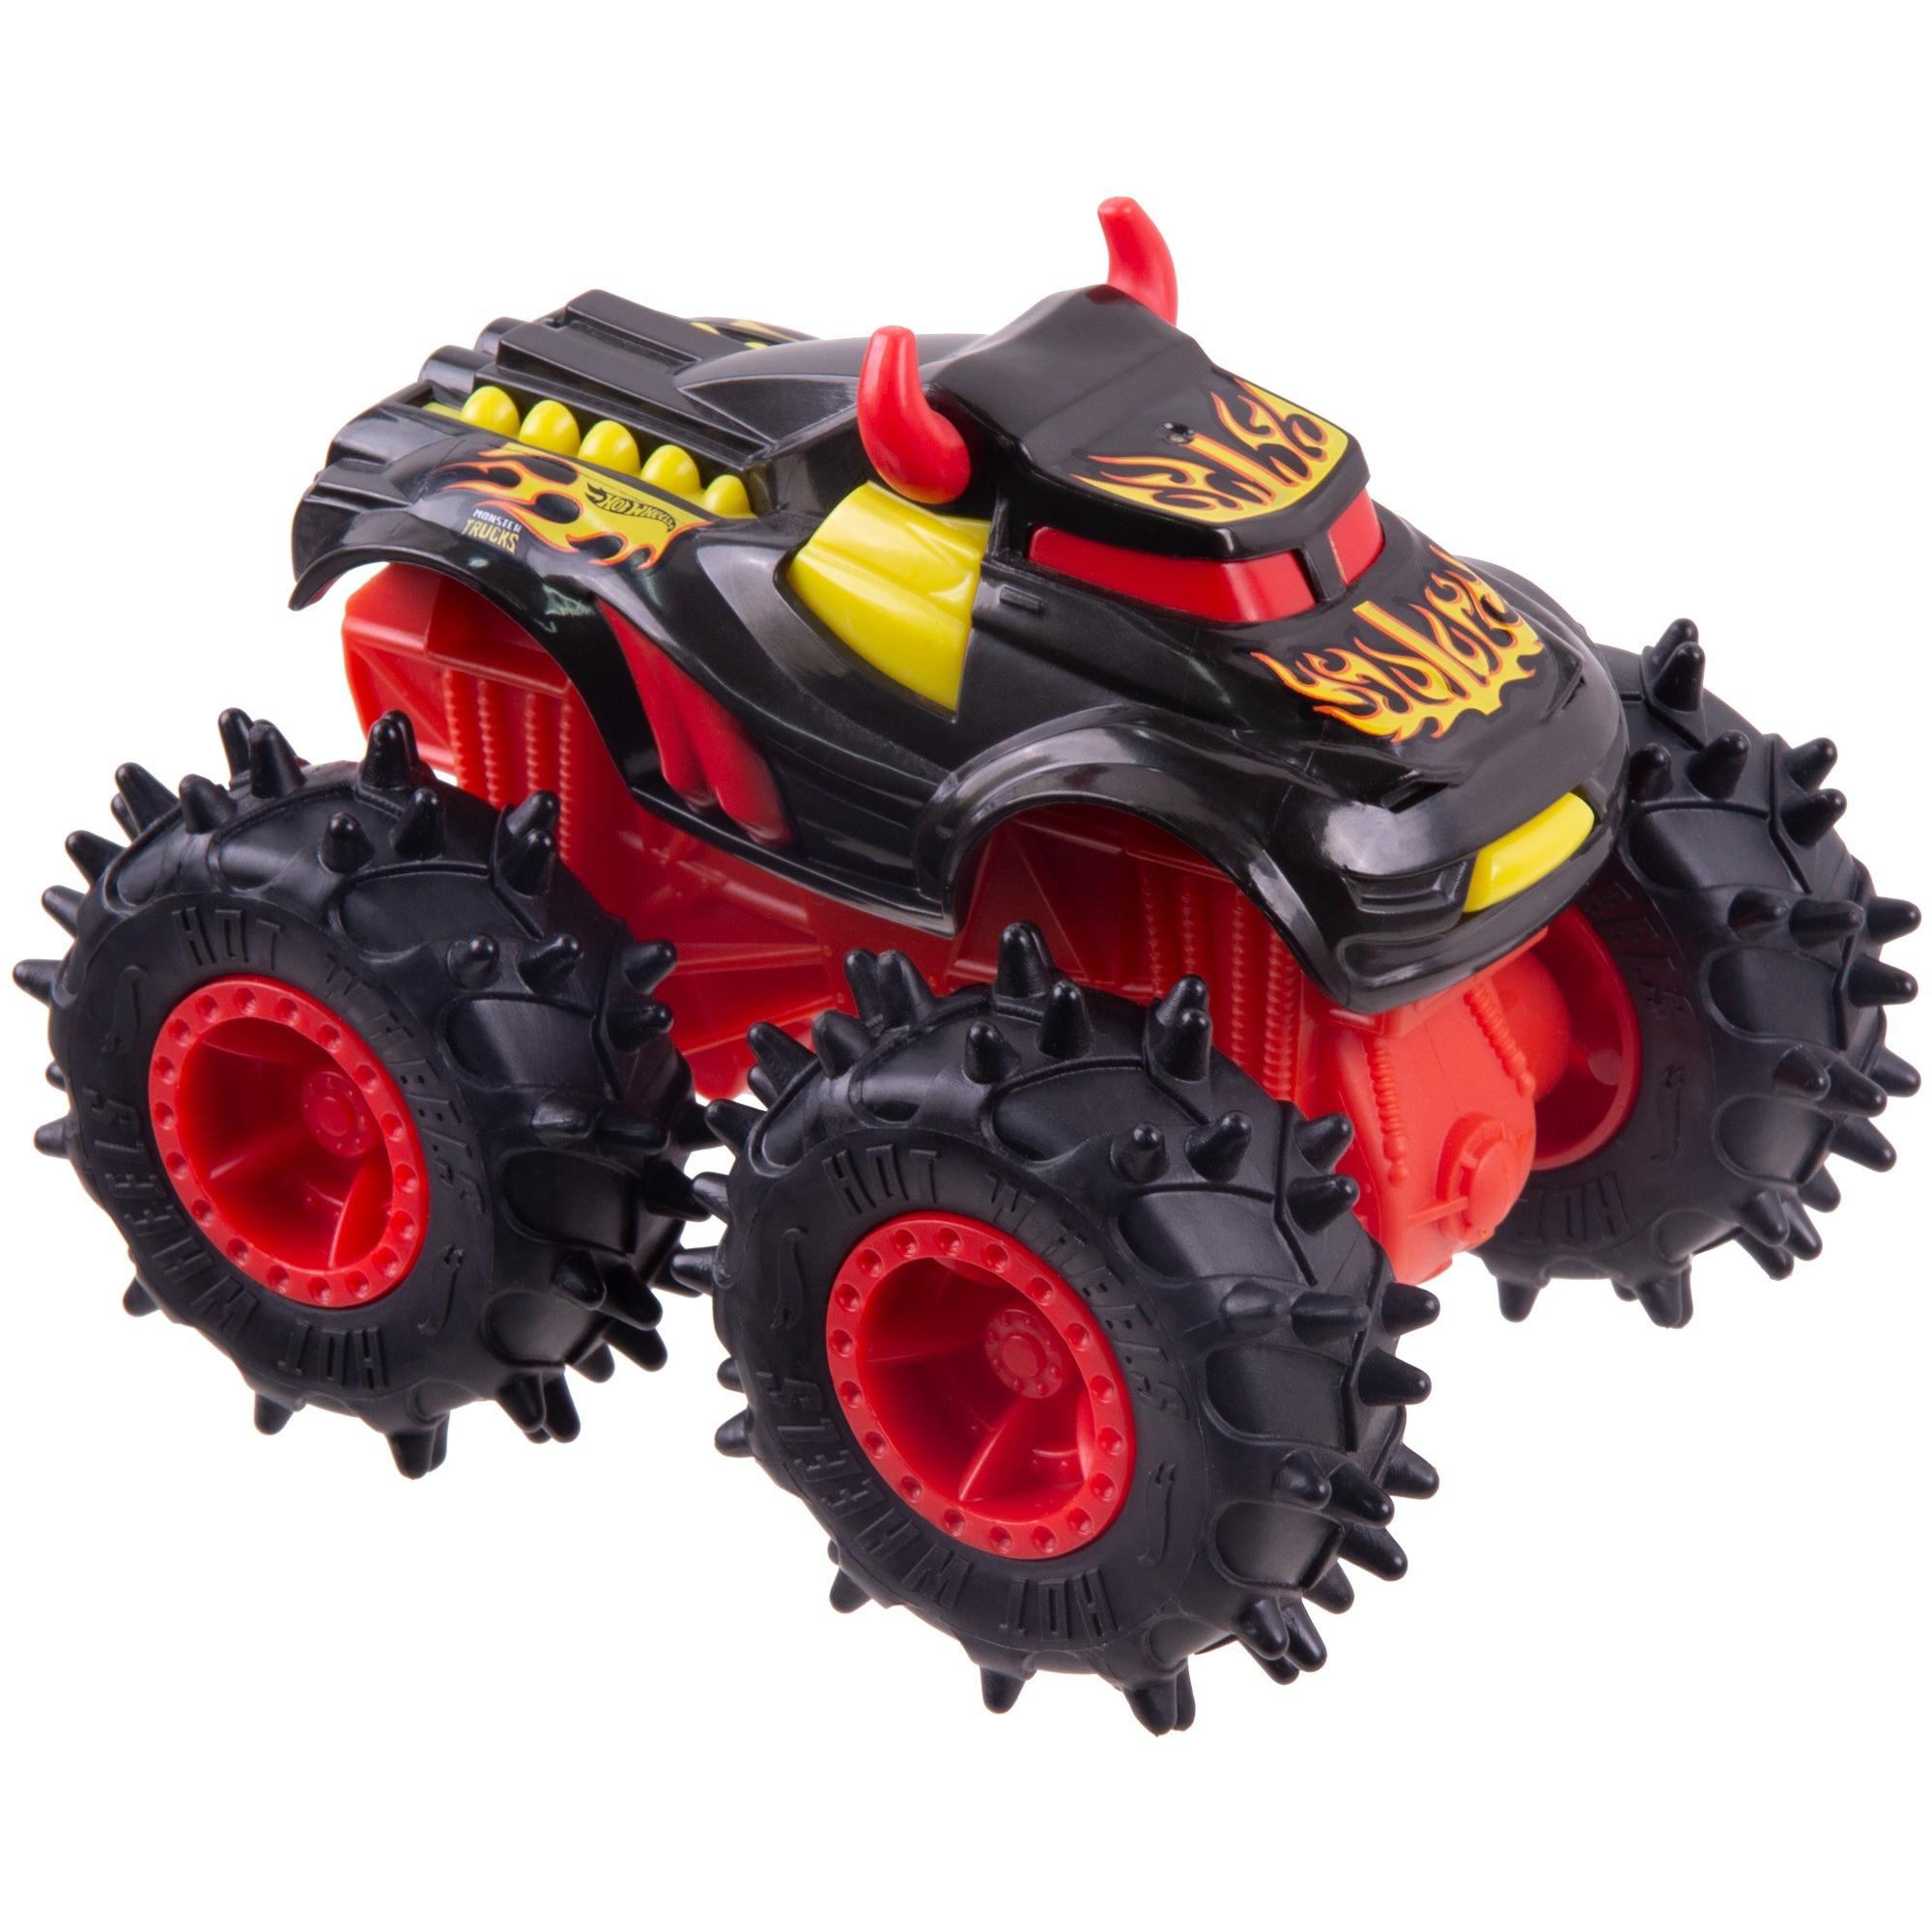 Monster Trucks By Hot Wheels 1:43 Scale Vehicle (Styles May Vary) - image 3 of 9